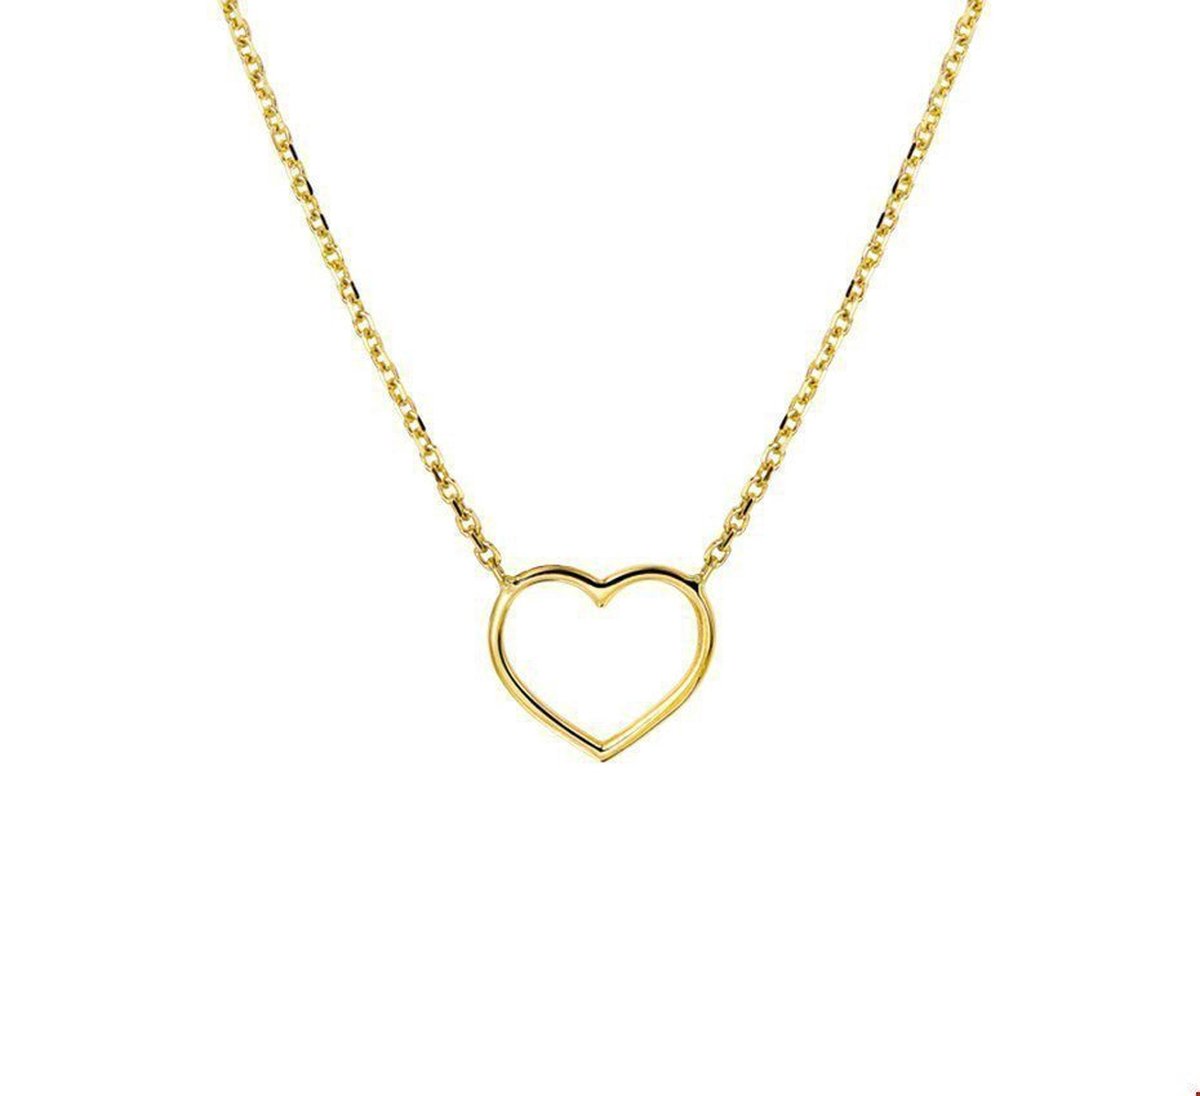 The Fashion Jewelry Collection Ketting Hart 42 + 2 cm - Geelgoud